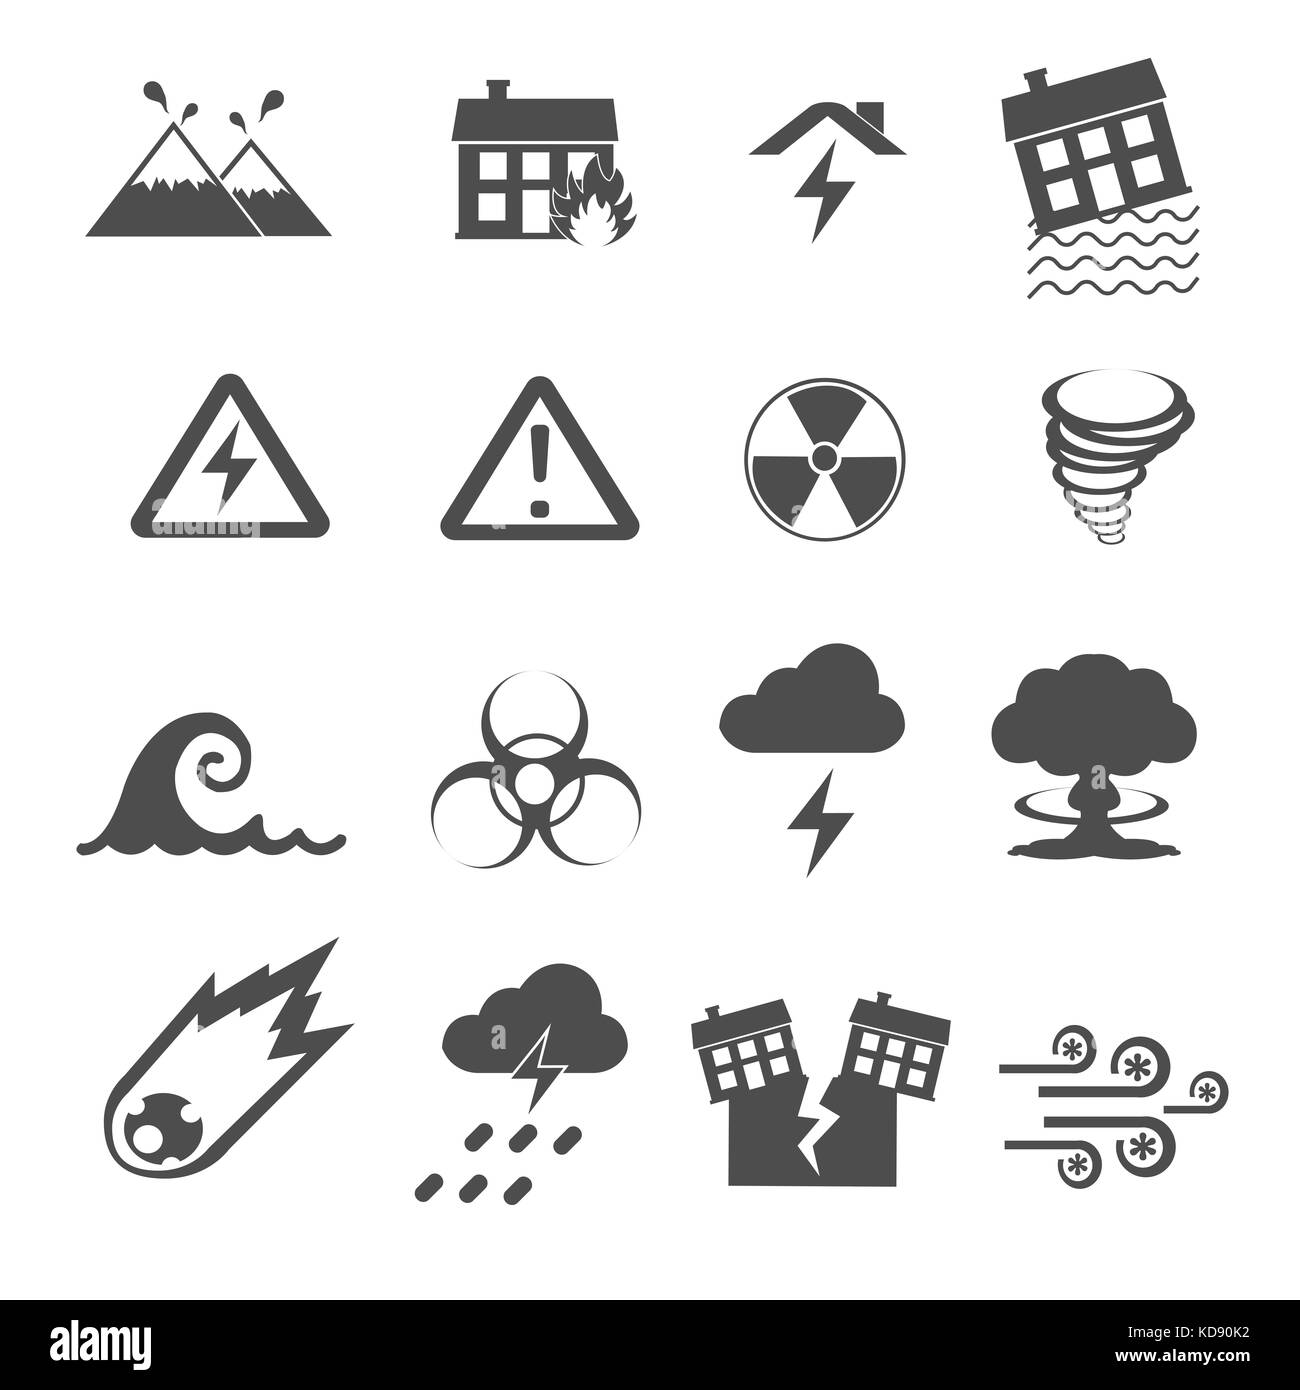 Disaster Icons Set Vector Stockfoto